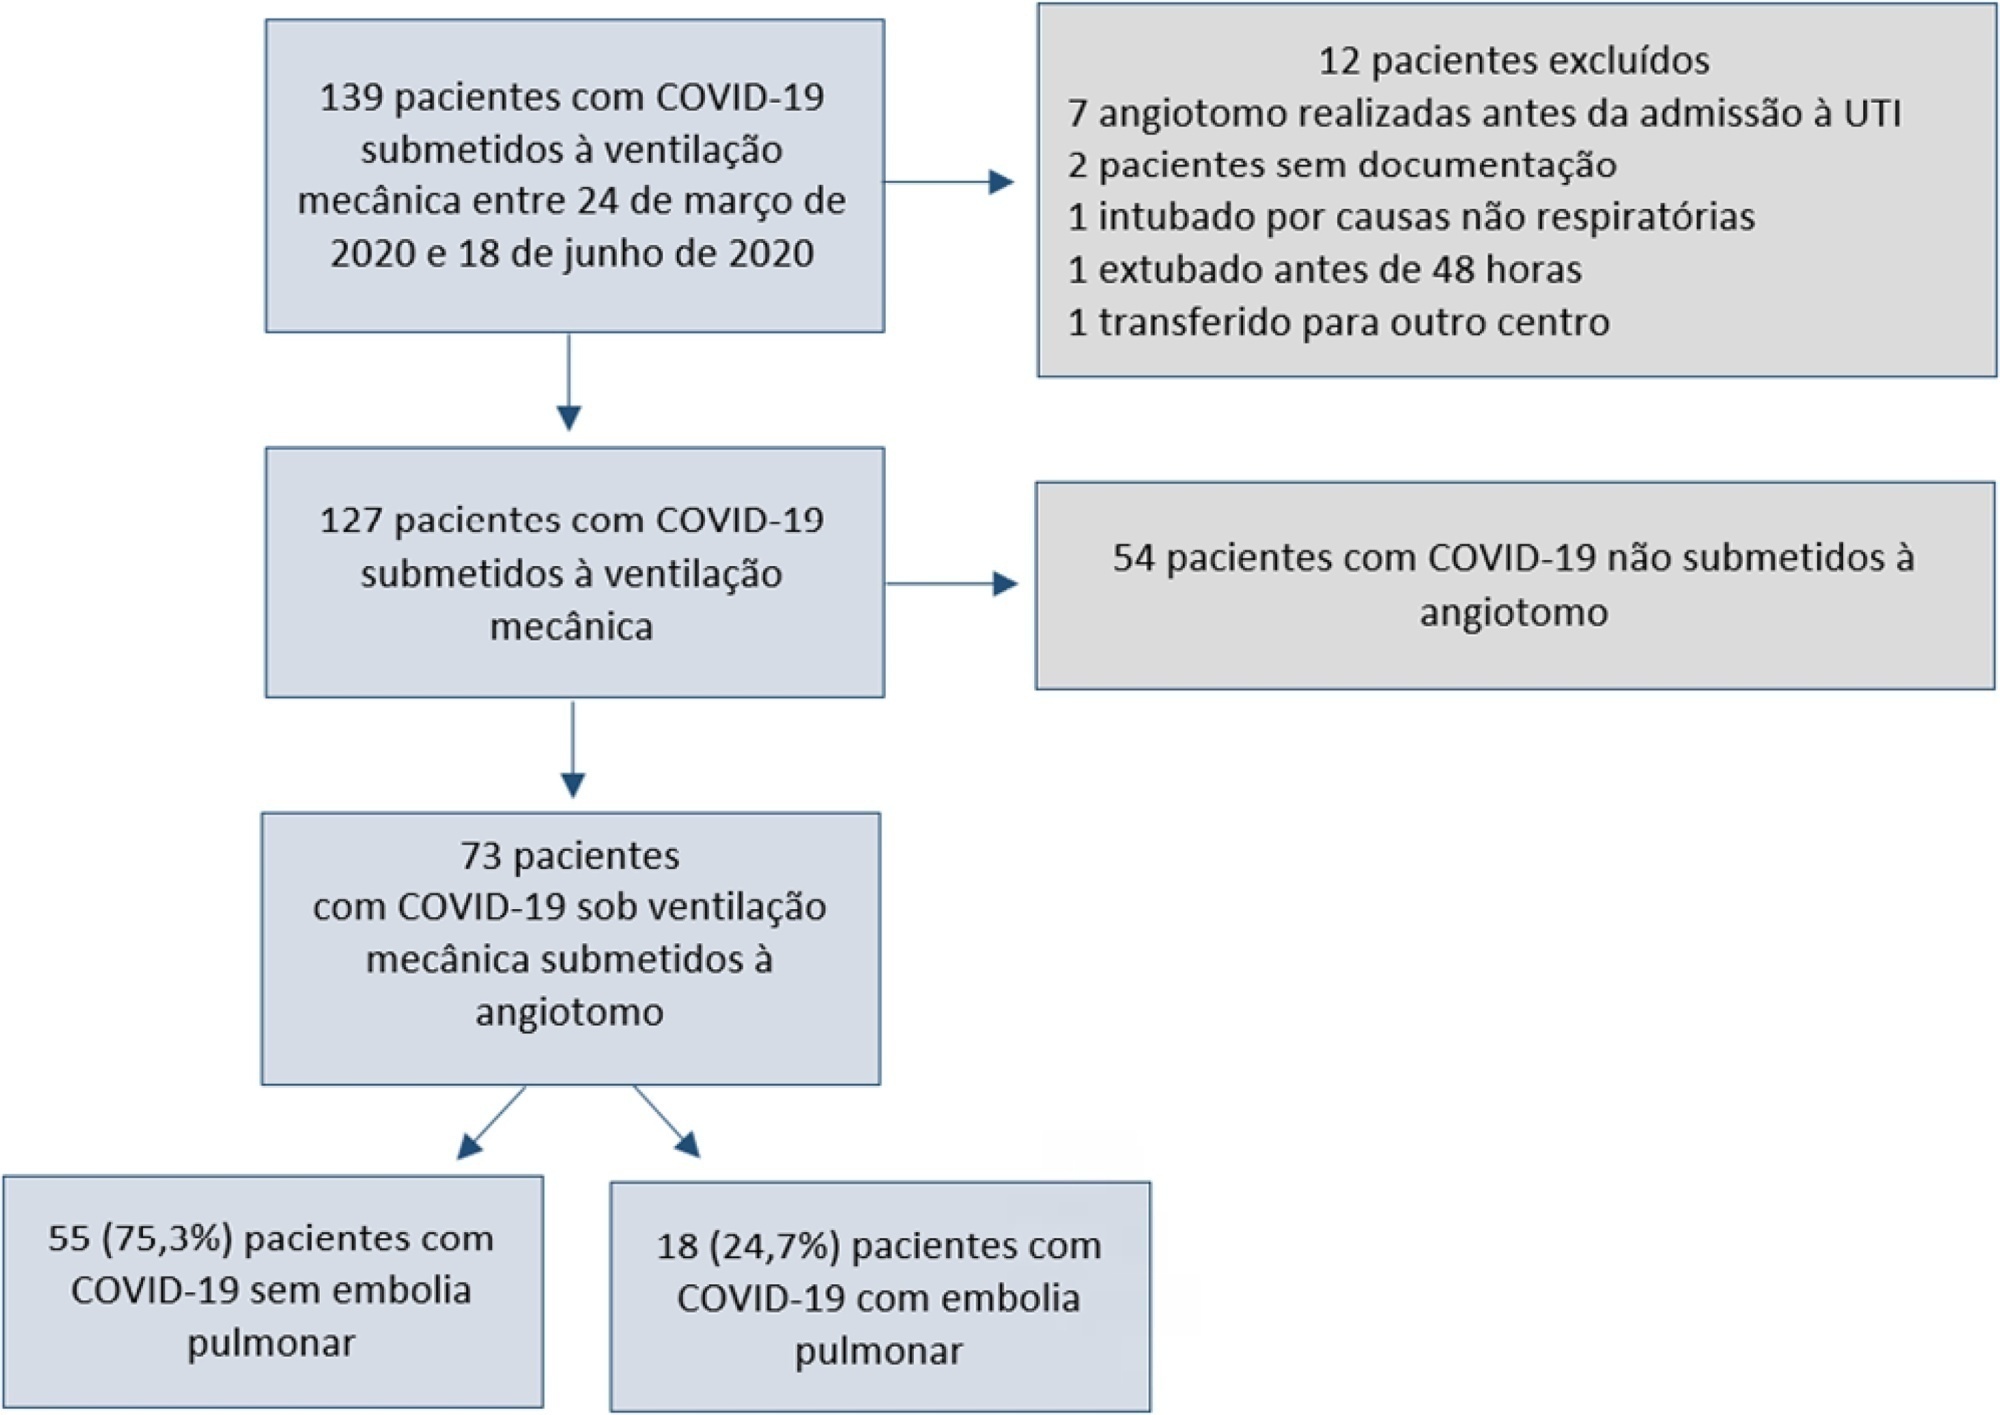 Pulmonary embolism risk factors for intensive care unit anticoagulated COVID-19 patients undergoing computed tomography angiography